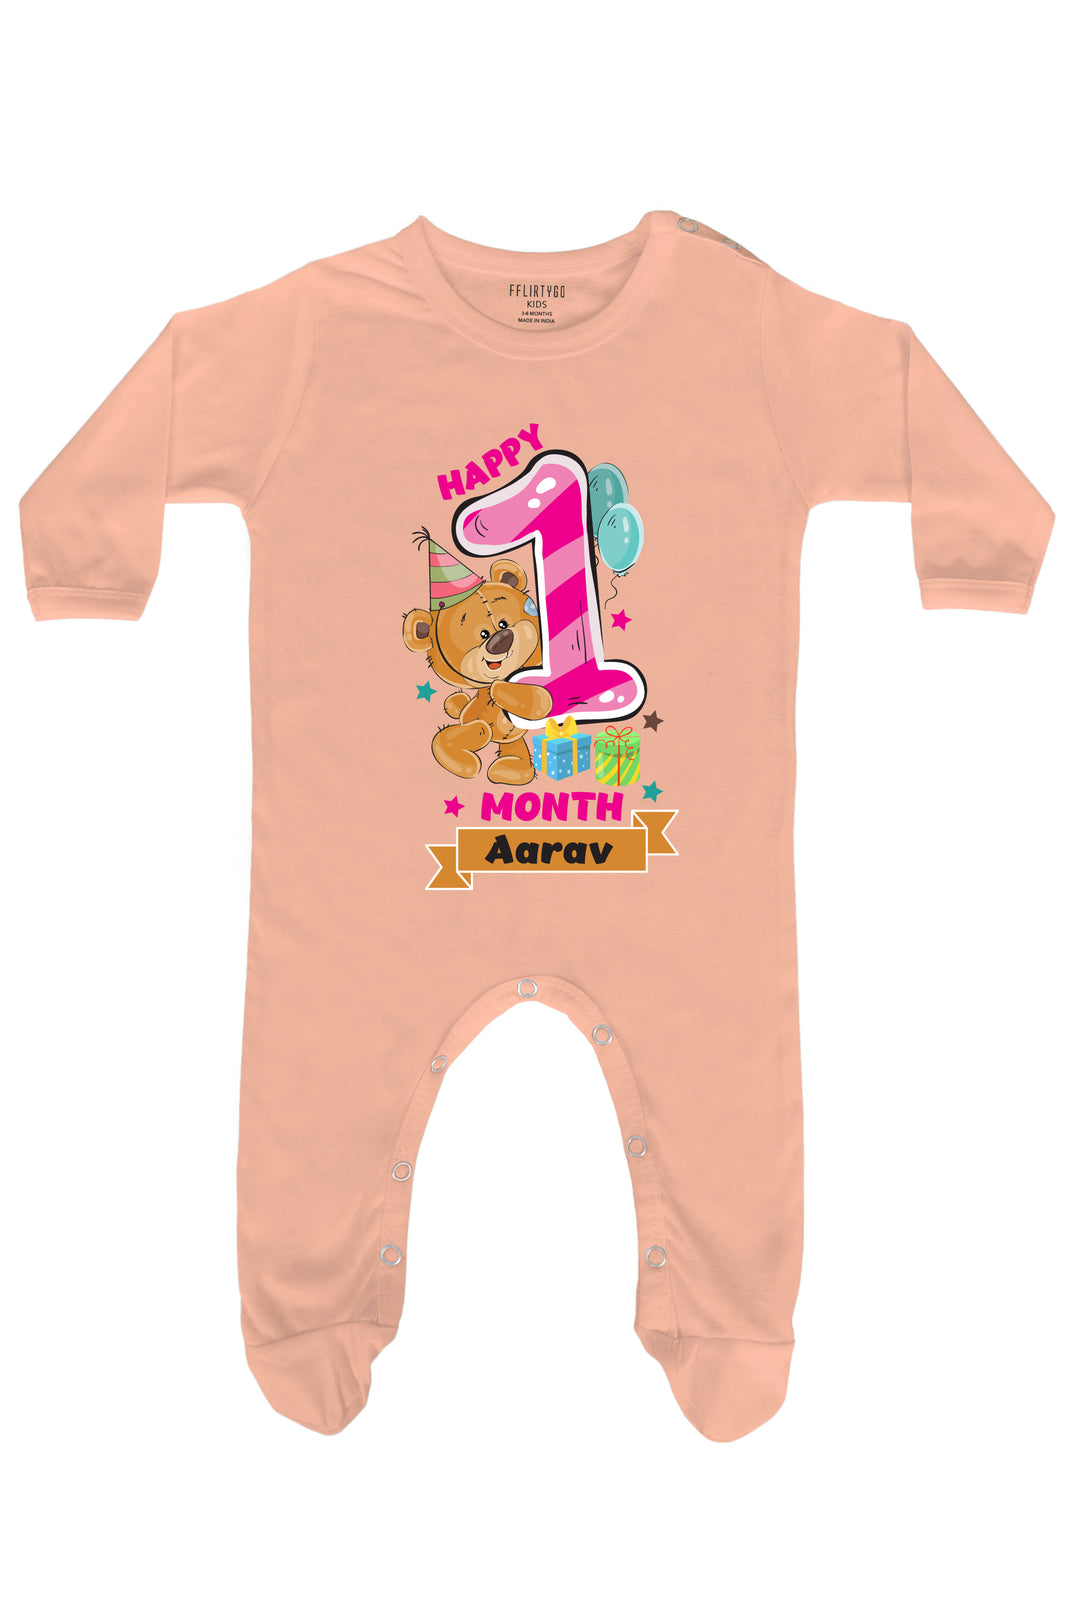 Shop our collection of onesies and baby rompers at Fflirtygo. From jumpsuits designed for infants to adorable newborn footed rompers and onesie dresses, explore unisex options perfect for your little one. Find the ideal outfit, even for one-month birthdays!